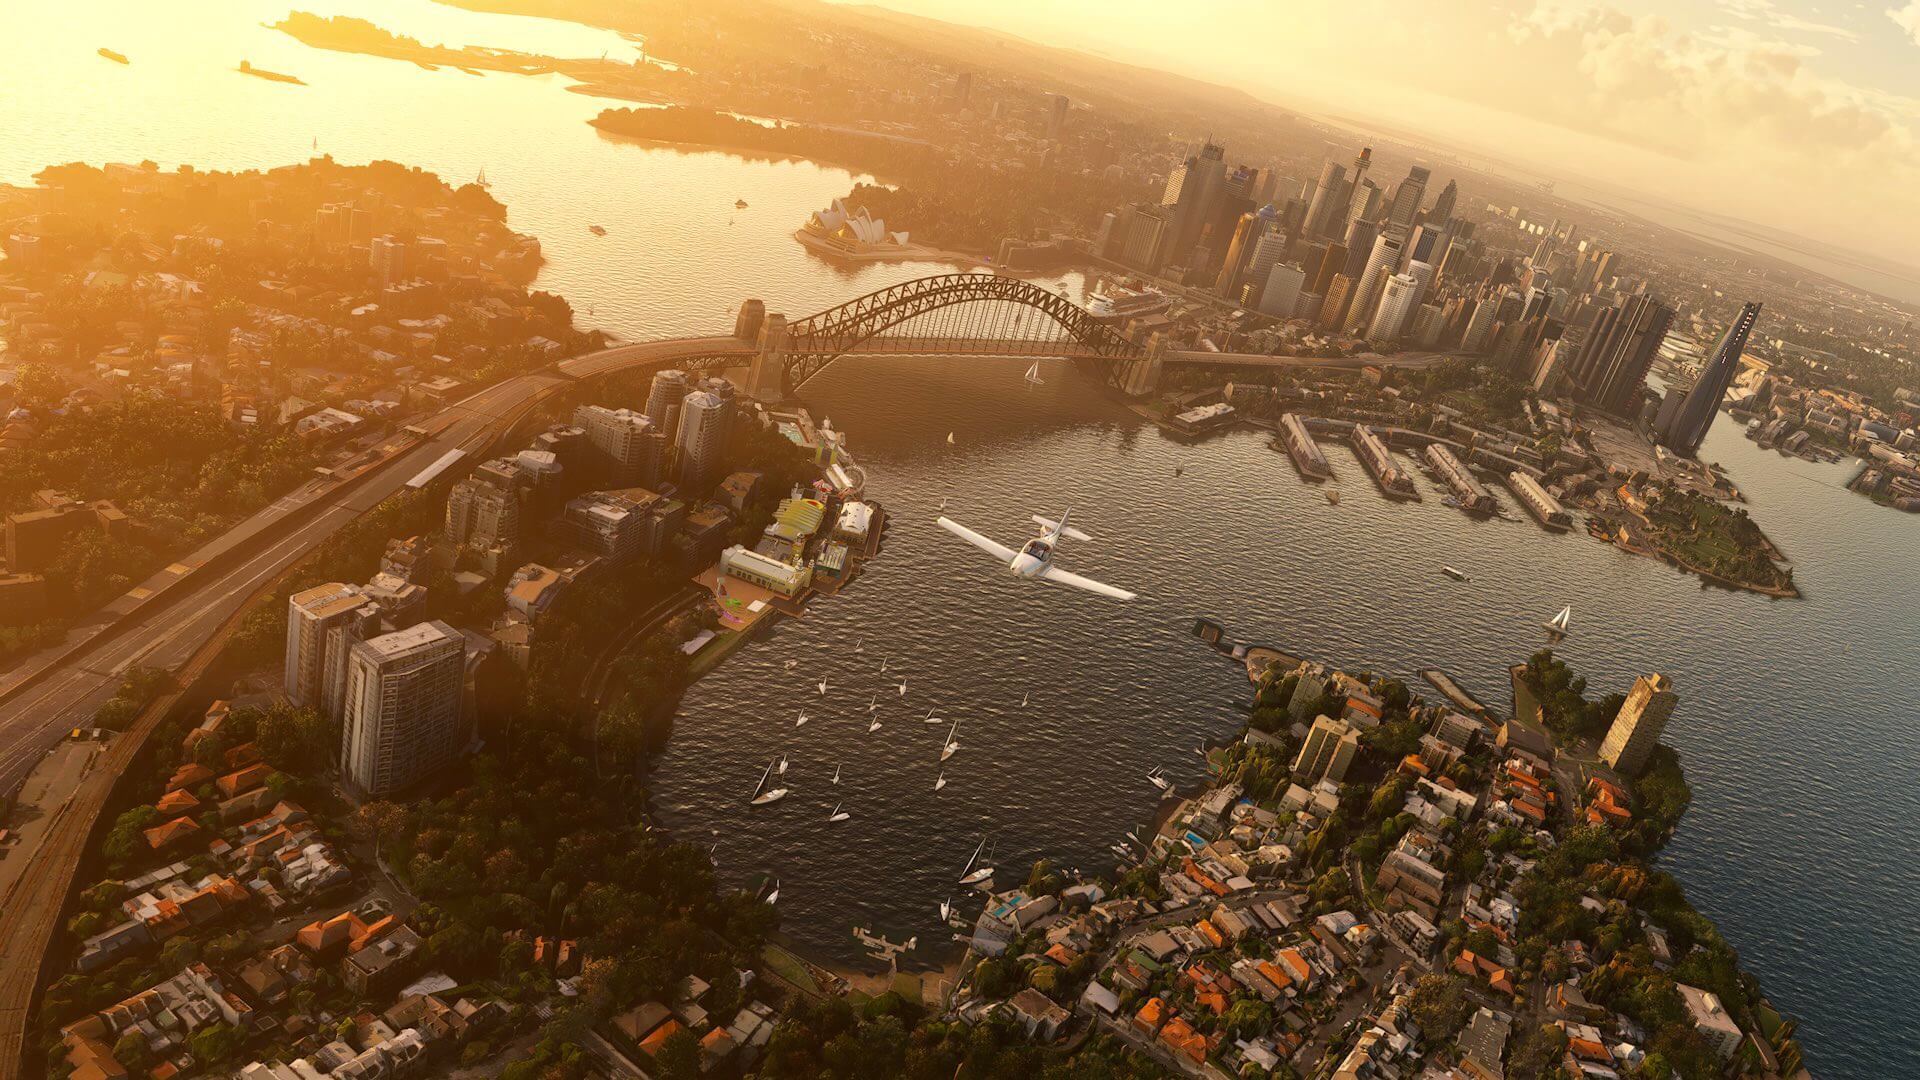 A general aviation aircraft crosses through the Sydney city scape and passed the Harbour Bridge